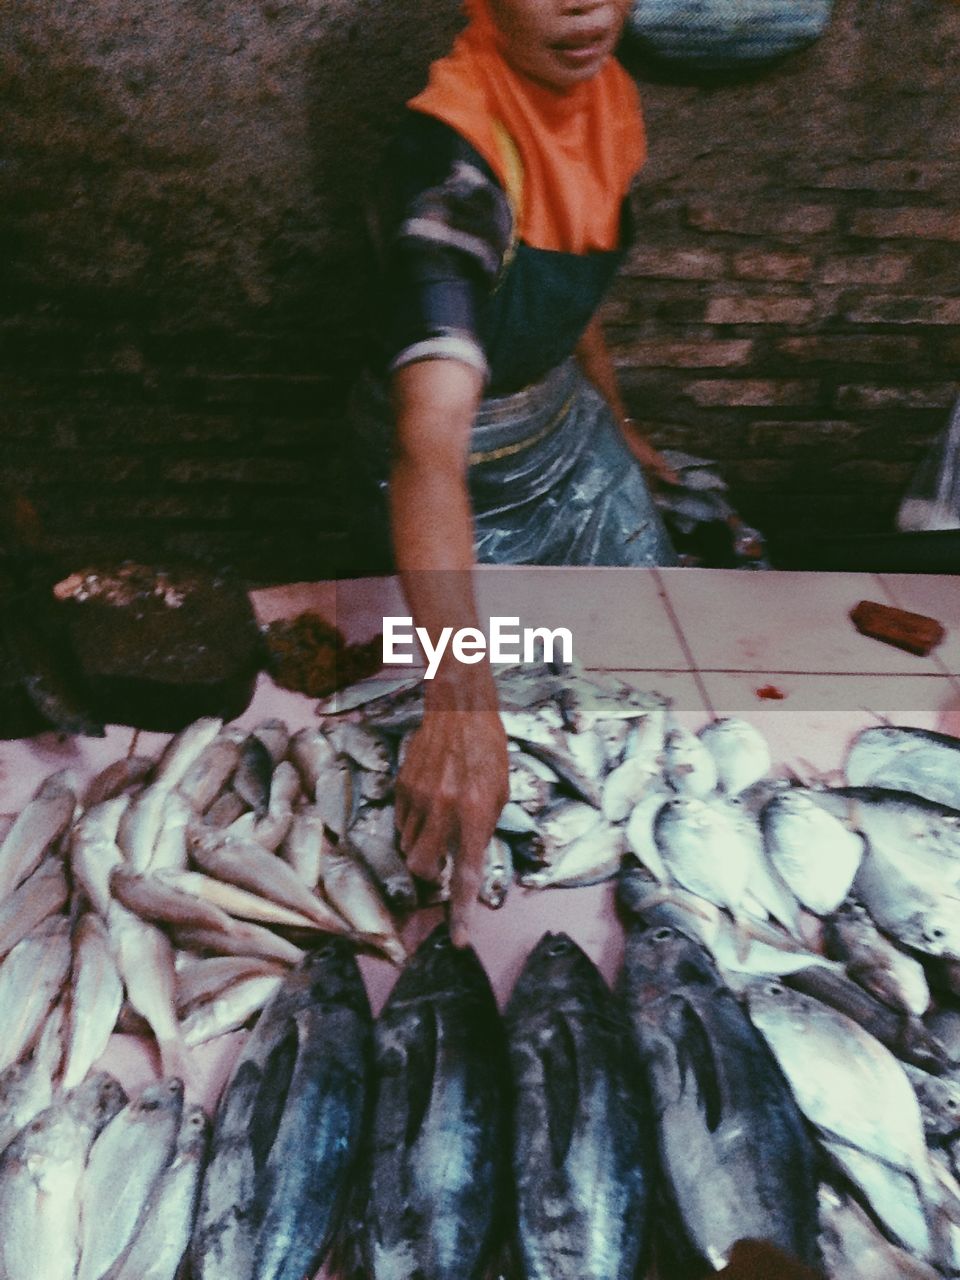 Mid section of a man selling fish